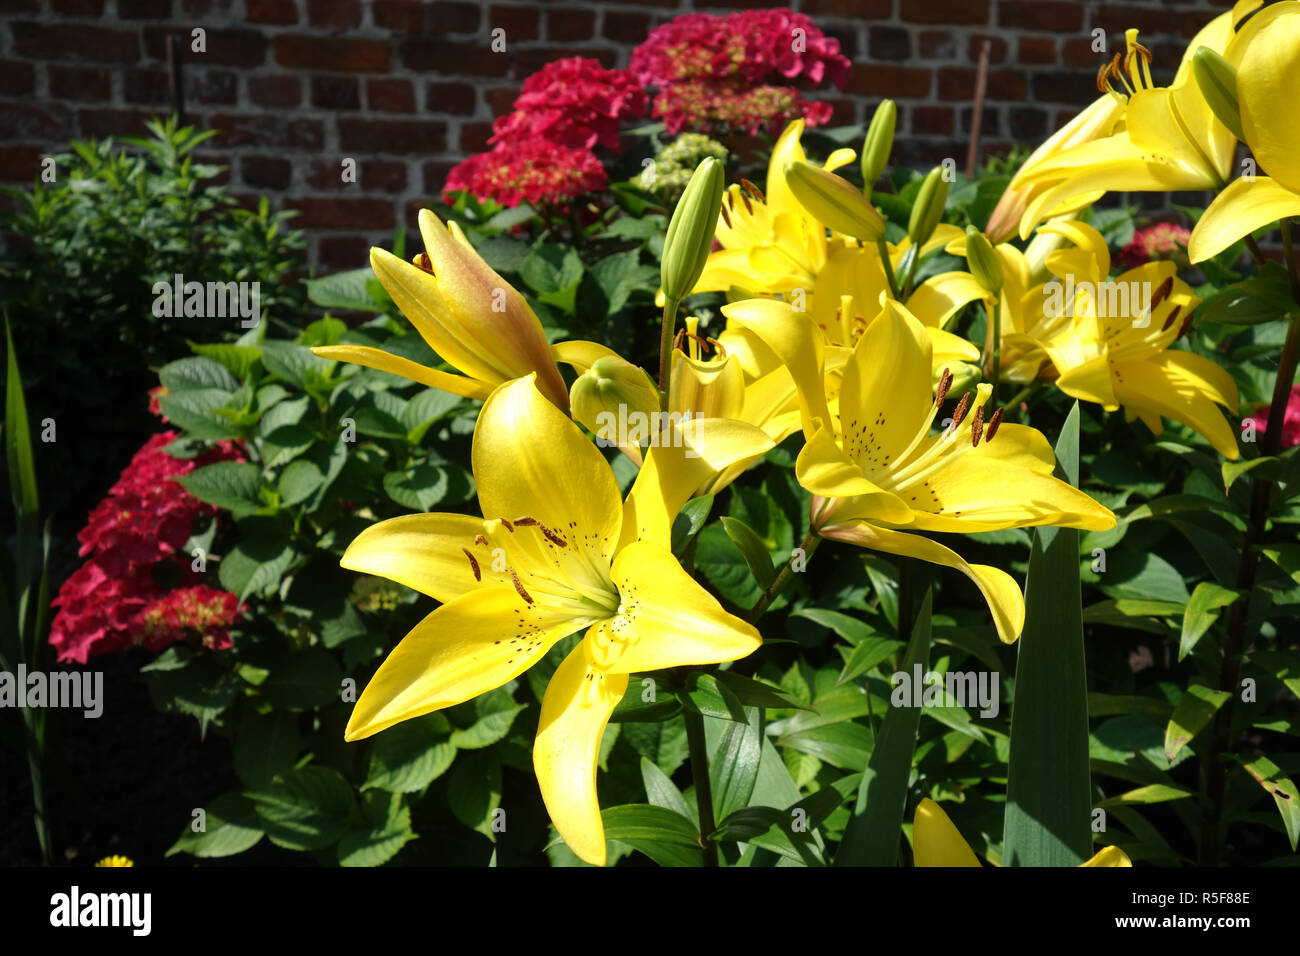 yellow lilies and red hydrangeas Stock Photo